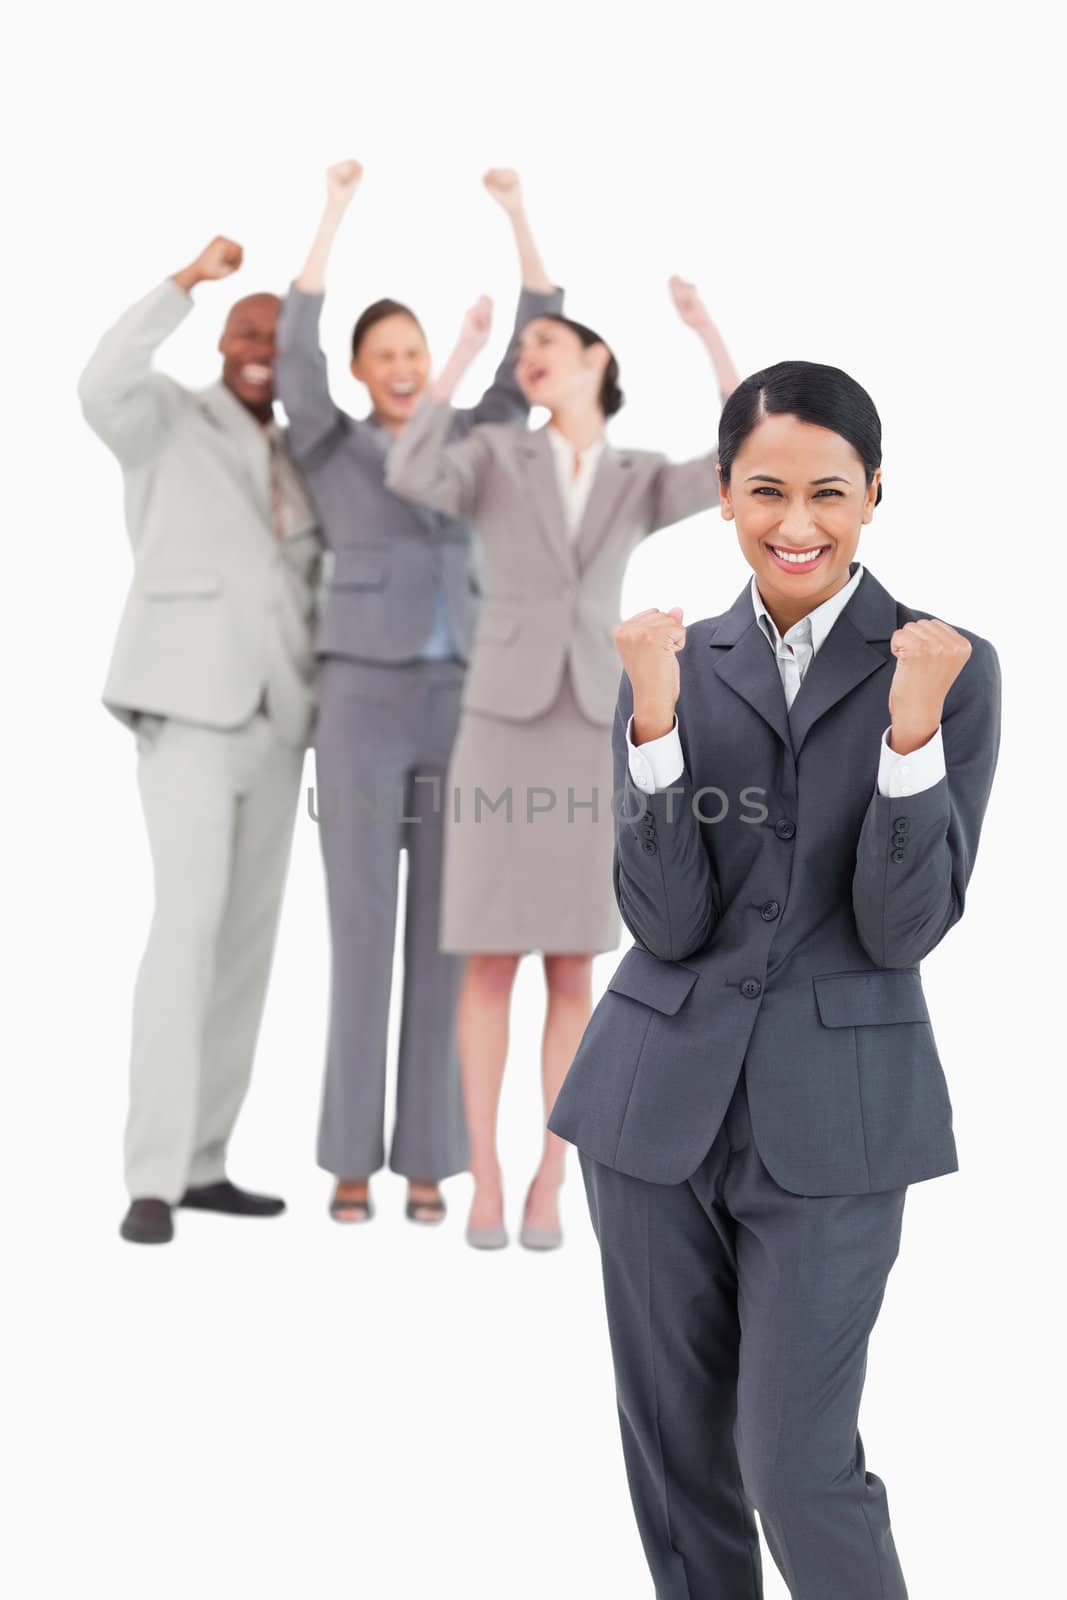 Successful saleswoman with cheerful team behind her against a white background